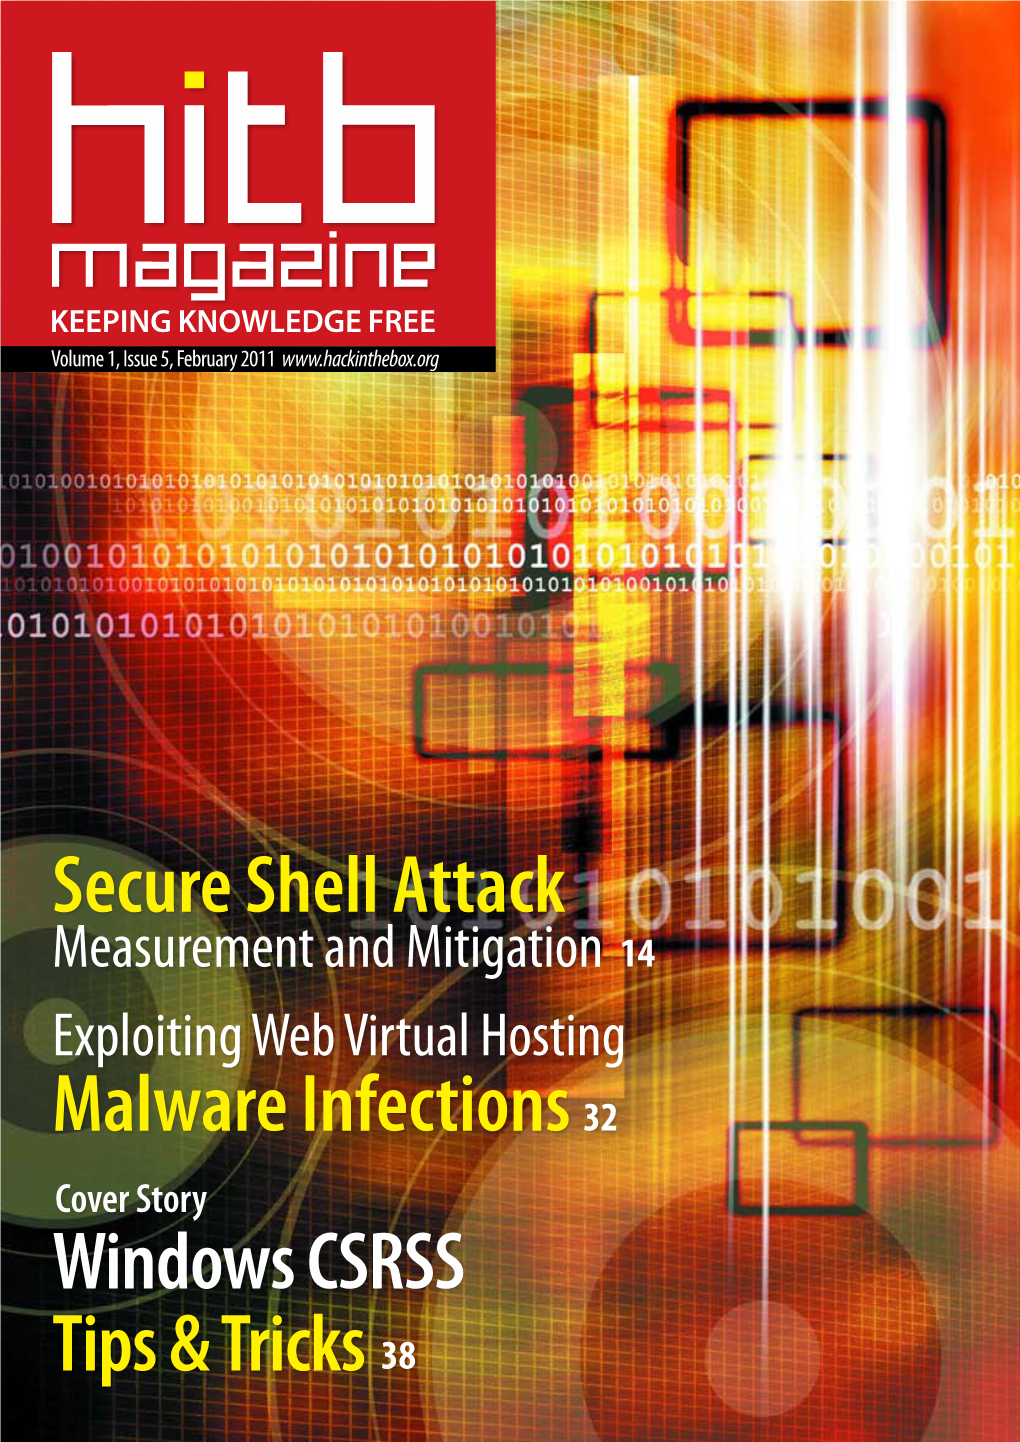 Malware Infections Secure Shell Attack Windows CSRSS Tips & Tricks38